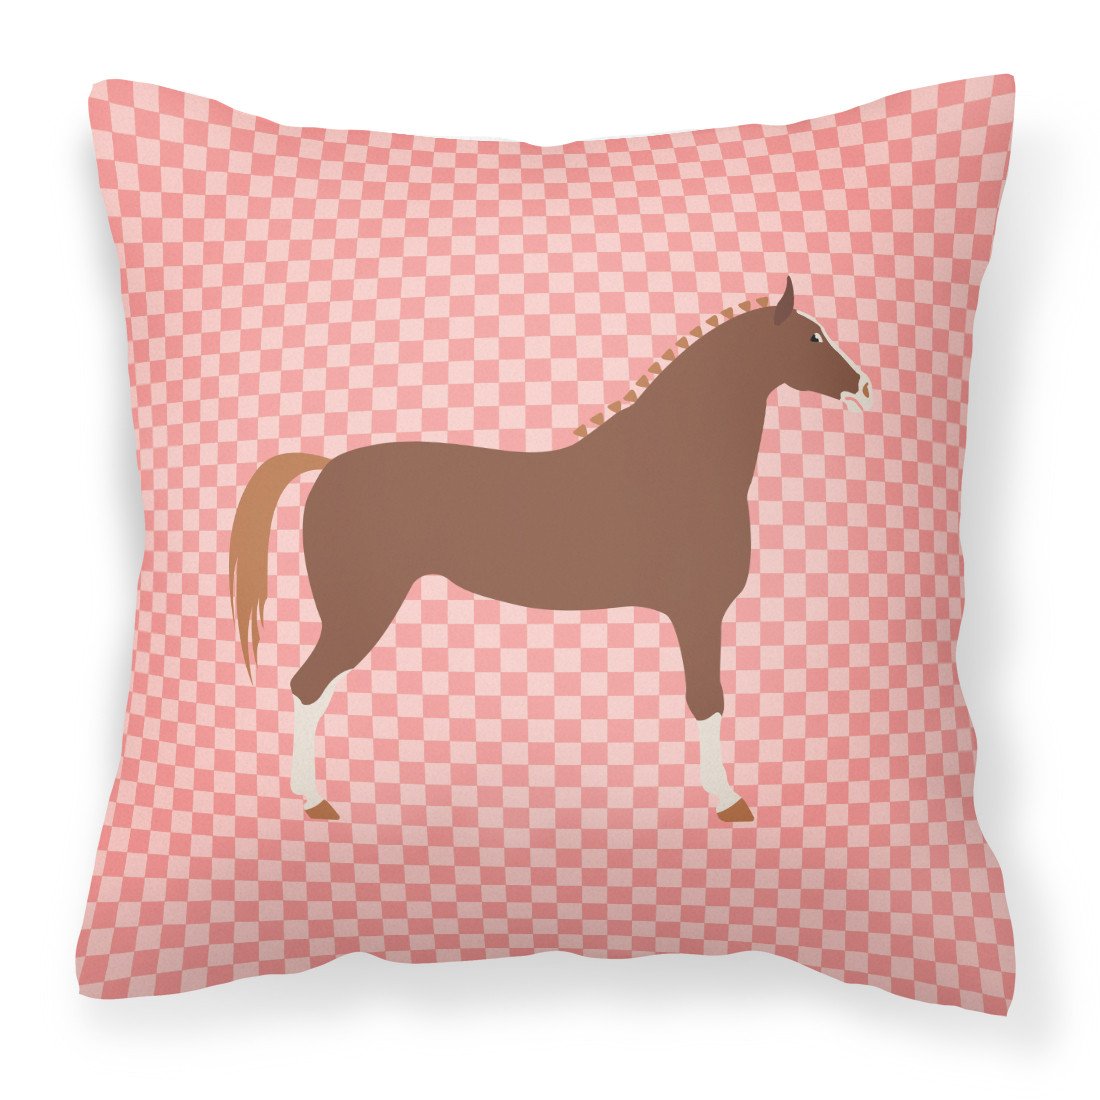 Hannoverian Horse Pink Check Fabric Decorative Pillow BB7909PW1818 by Caroline's Treasures